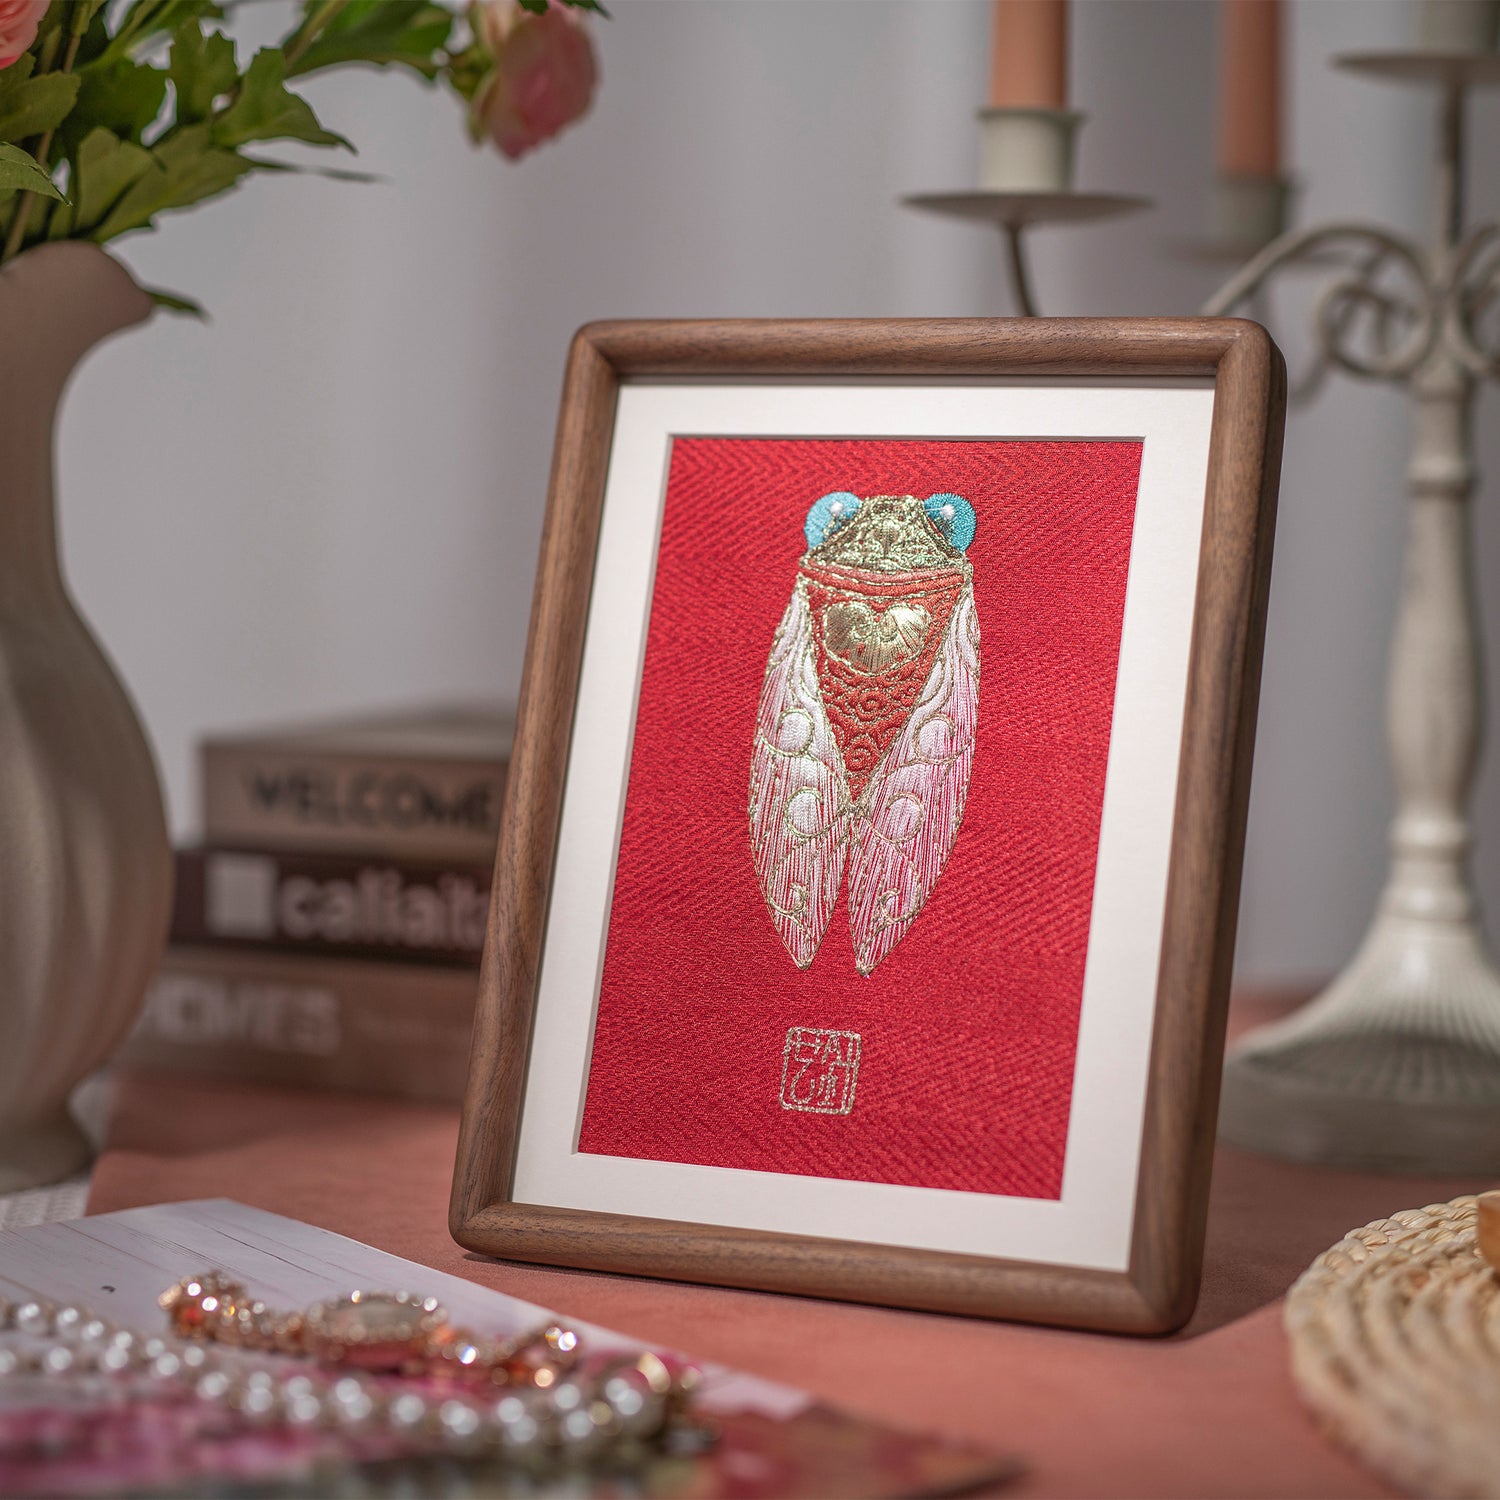 The golden Cicada embroidery artwork, paired with a five-head candlestick, pink flowers, and jewelry, is quietly placed on top of a wood-grain table